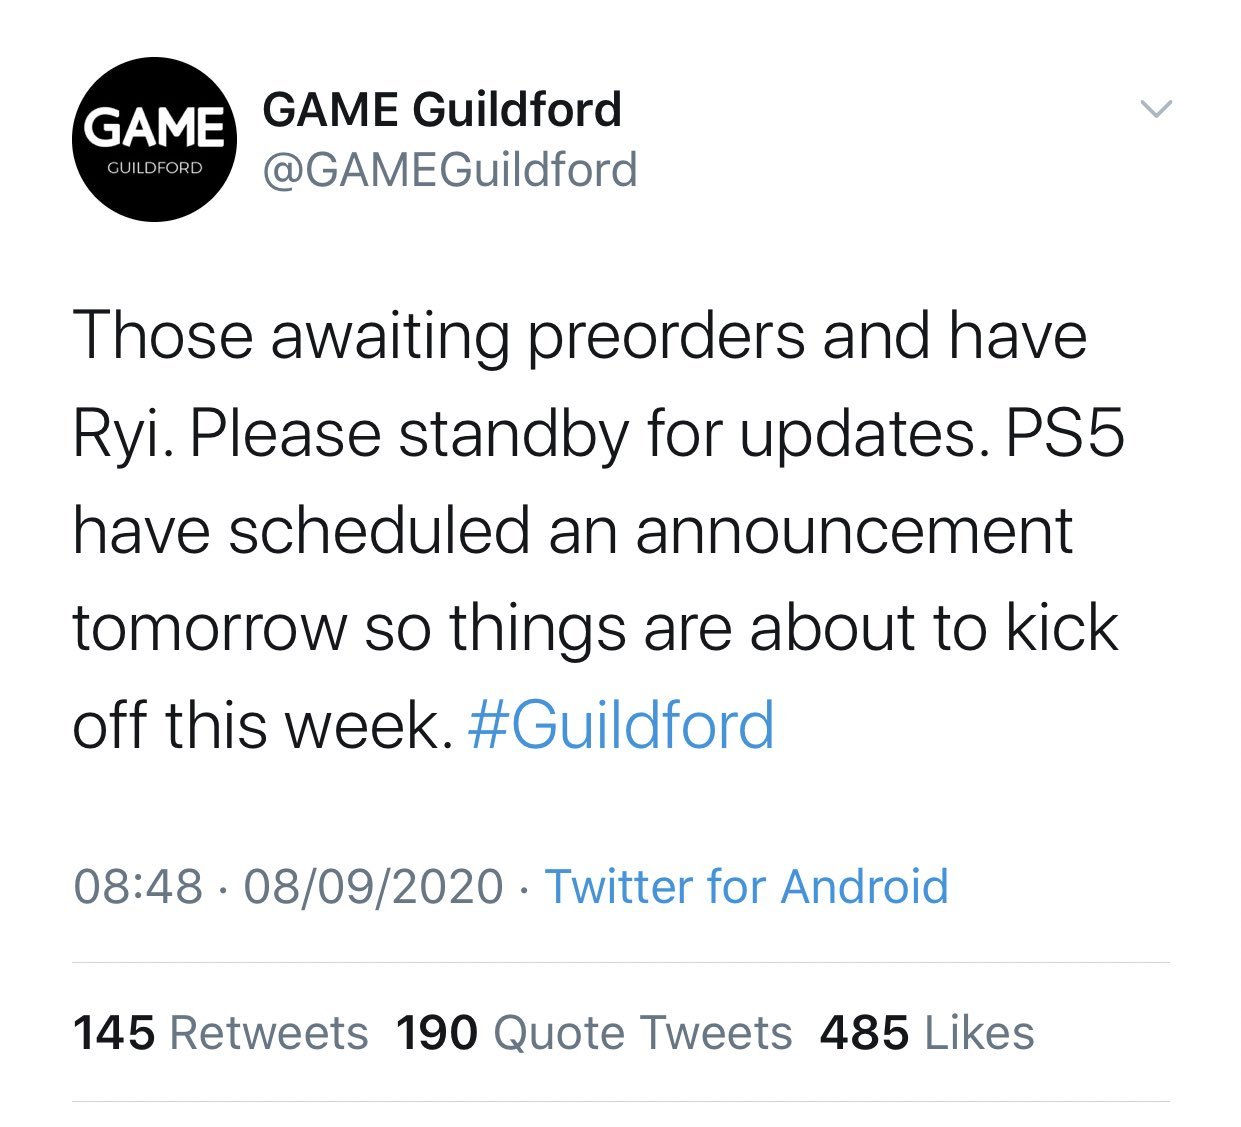 (Fonte: Game Guildford/Twitter)